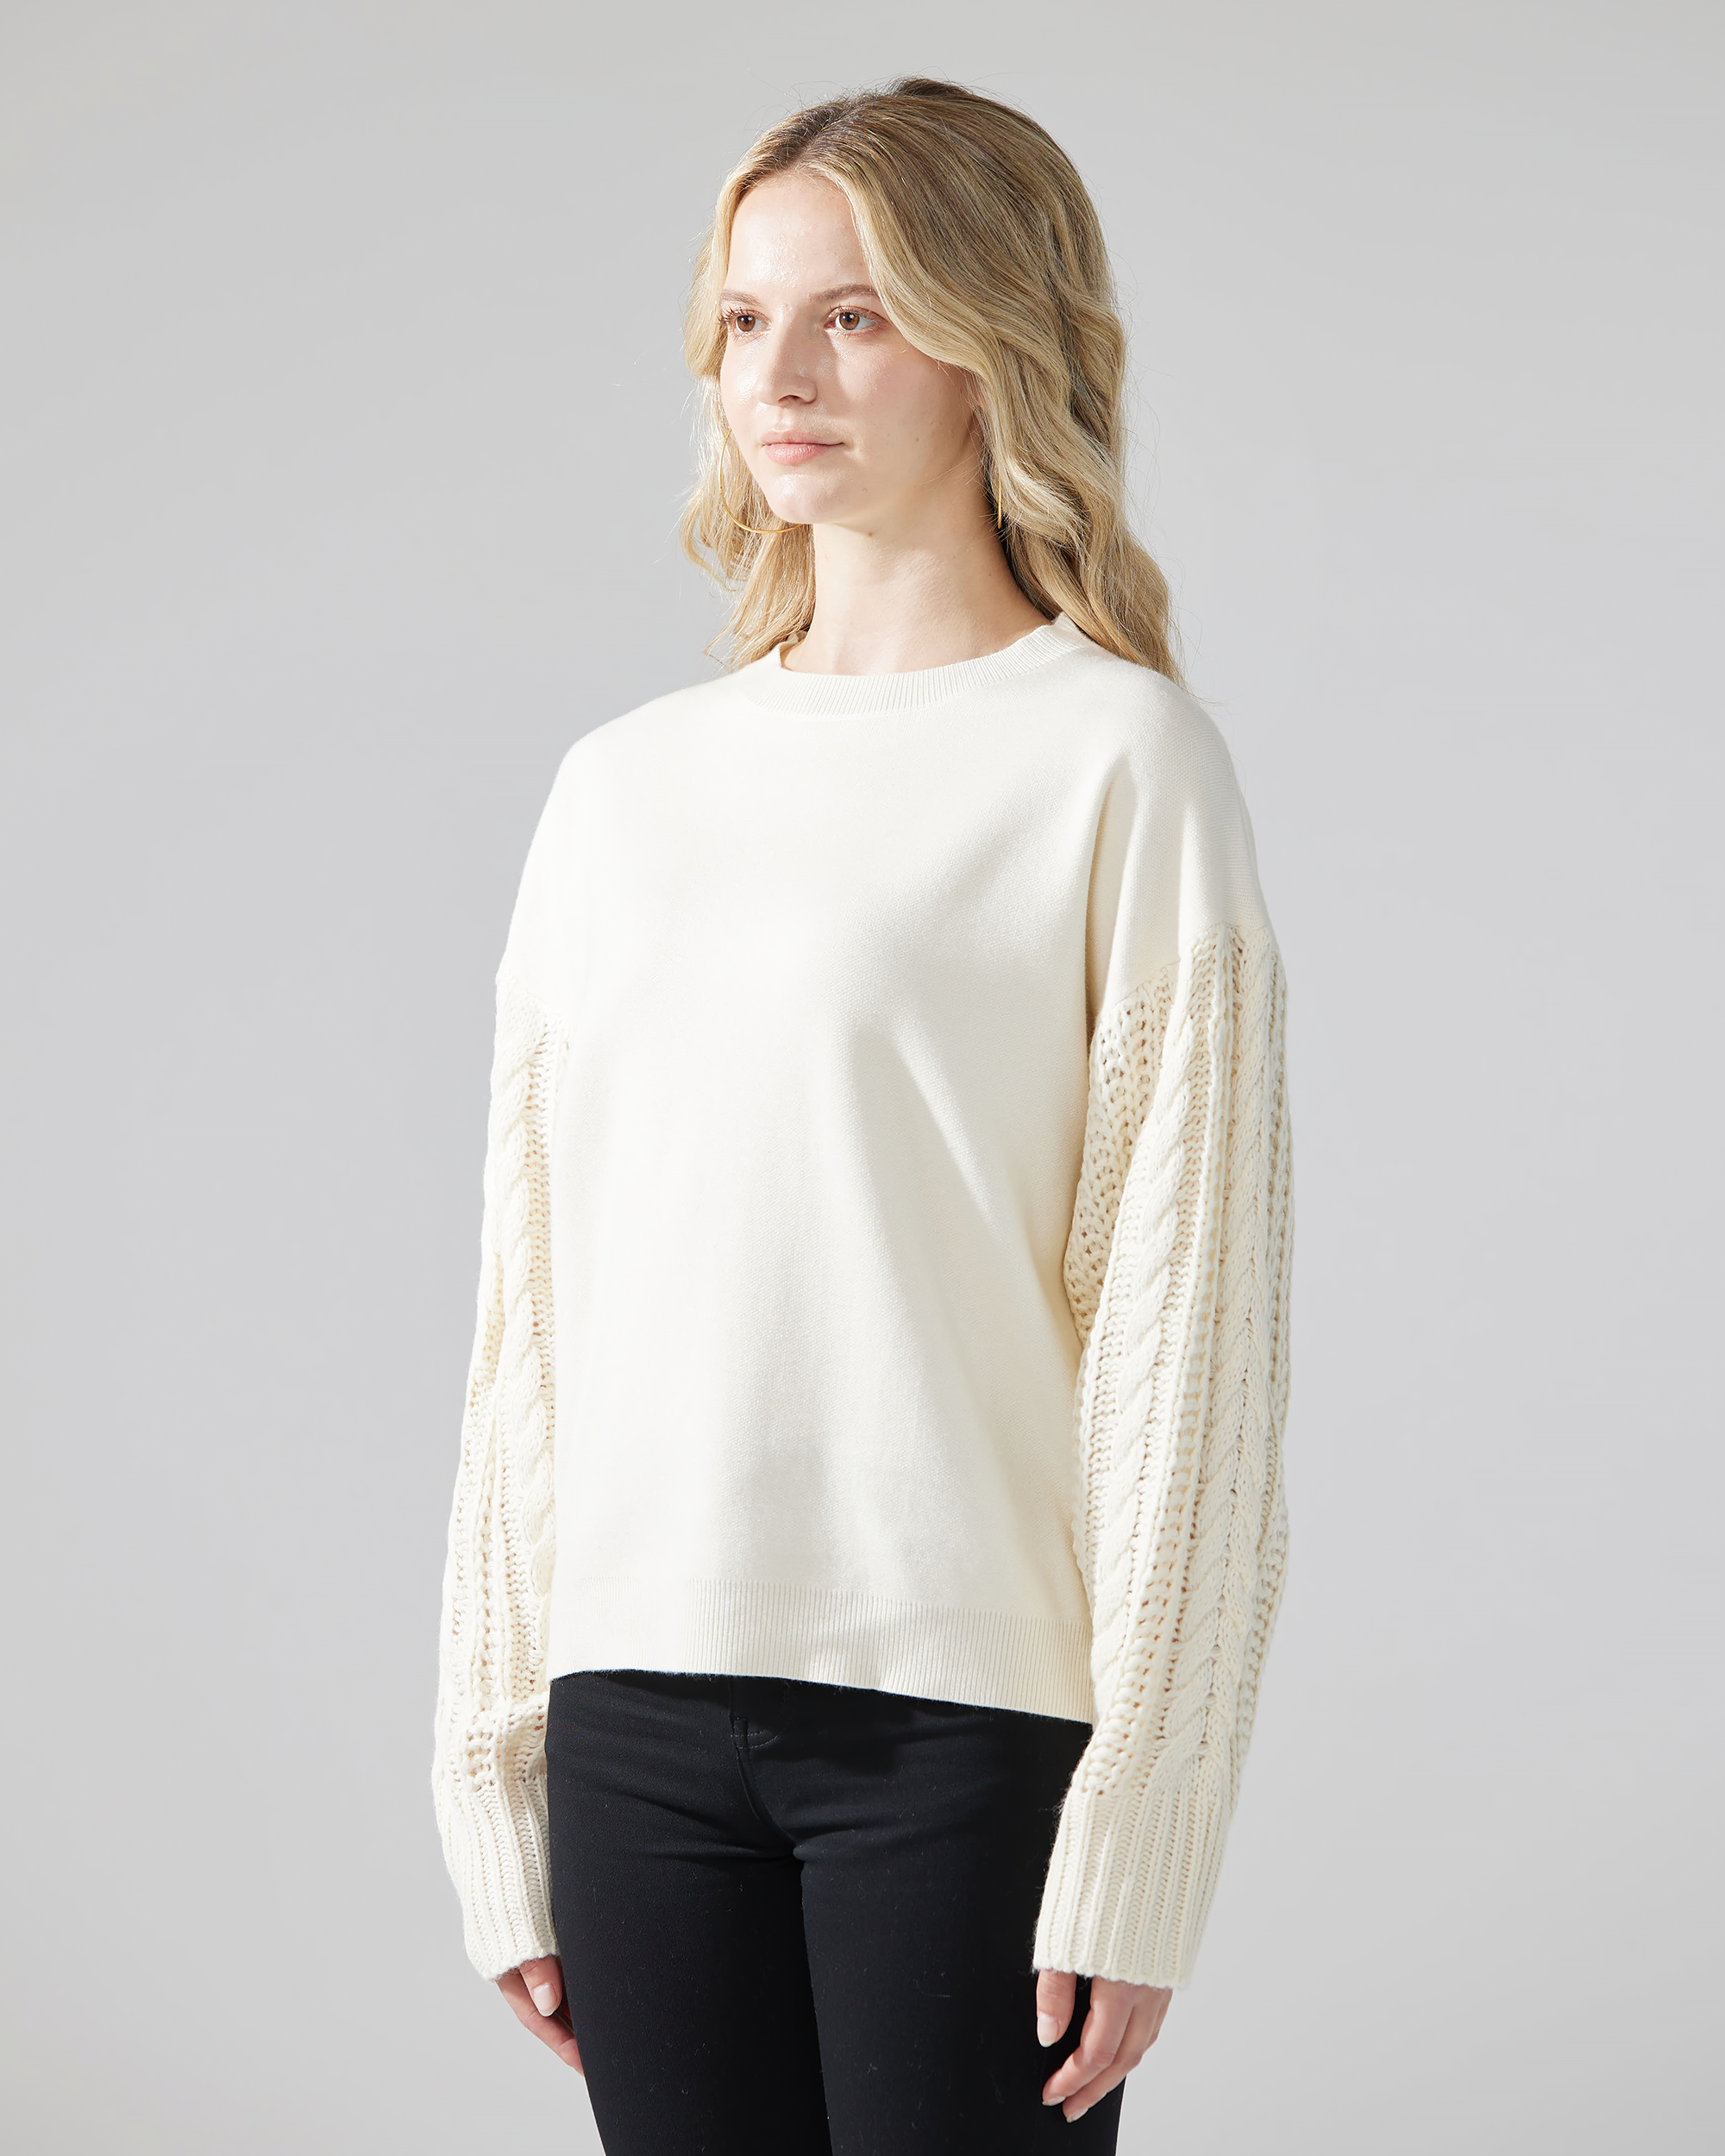 Ivory Cable Knit Sweater for You